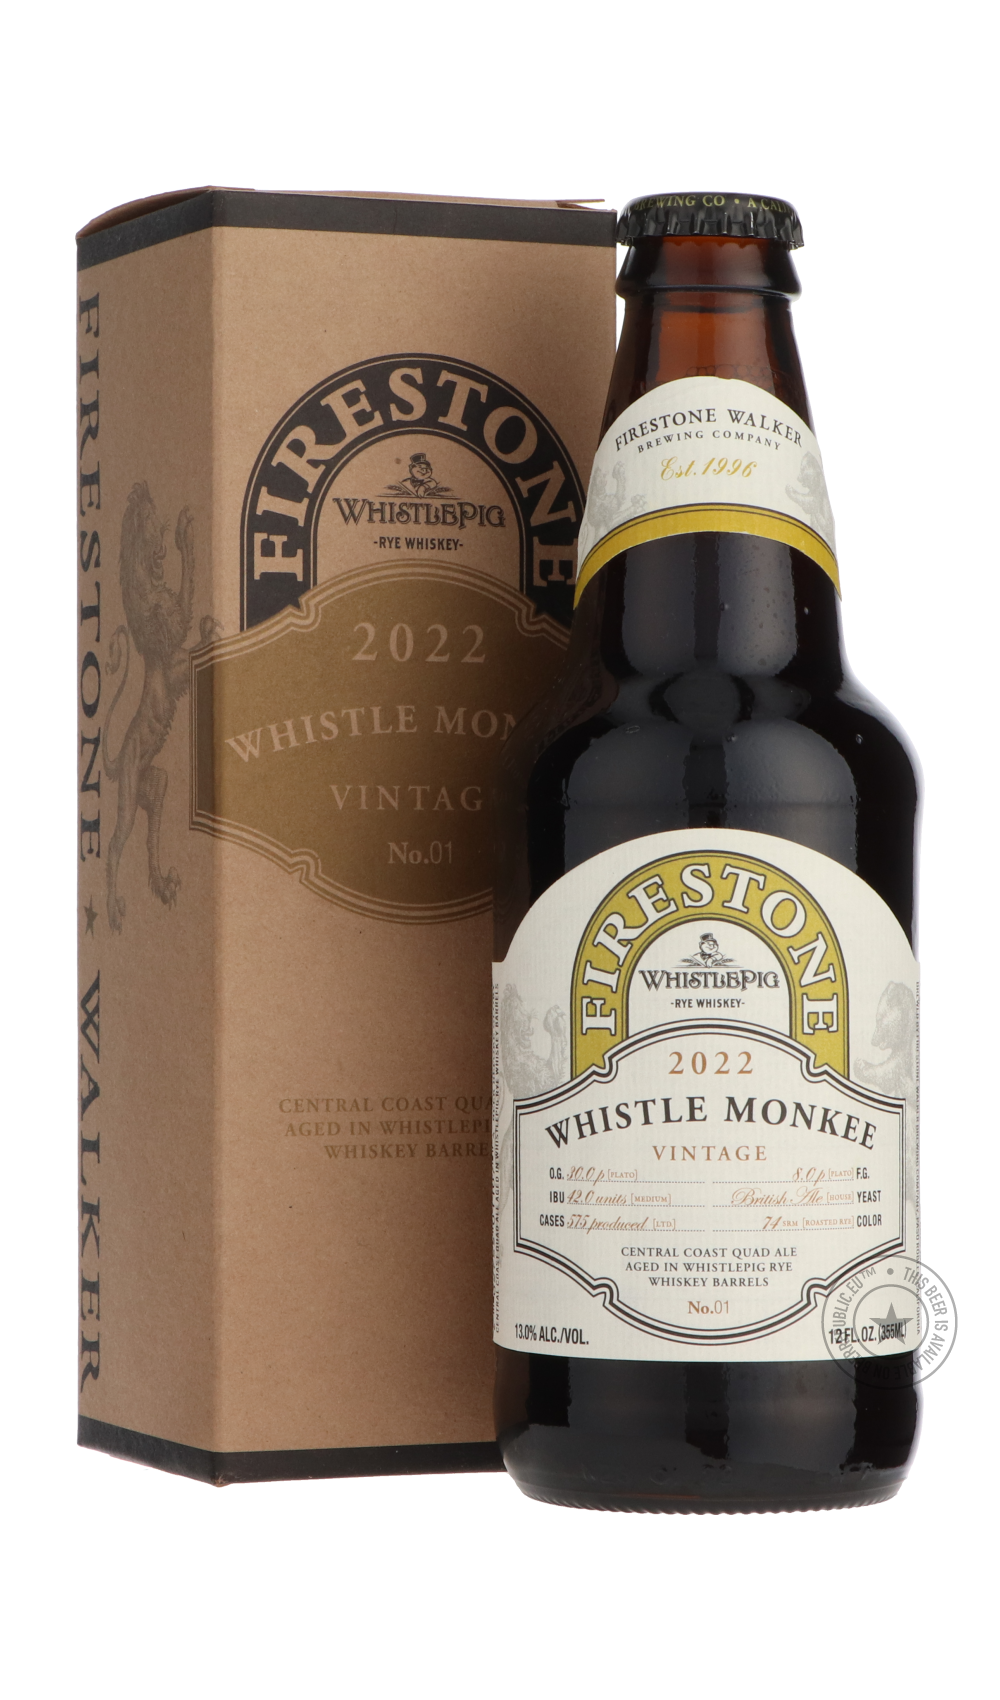 -Firestone Walker- Whistle Monkee 2022-Brown & Dark- Only @ Beer Republic - The best online beer store for American & Canadian craft beer - Buy beer online from the USA and Canada - Bier online kopen - Amerikaans bier kopen - Craft beer store - Craft beer kopen - Amerikanisch bier kaufen - Bier online kaufen - Acheter biere online - IPA - Stout - Porter - New England IPA - Hazy IPA - Imperial Stout - Barrel Aged - Barrel Aged Imperial Stout - Brown - Dark beer - Blond - Blonde - Pilsner - Lager - Wheat - We